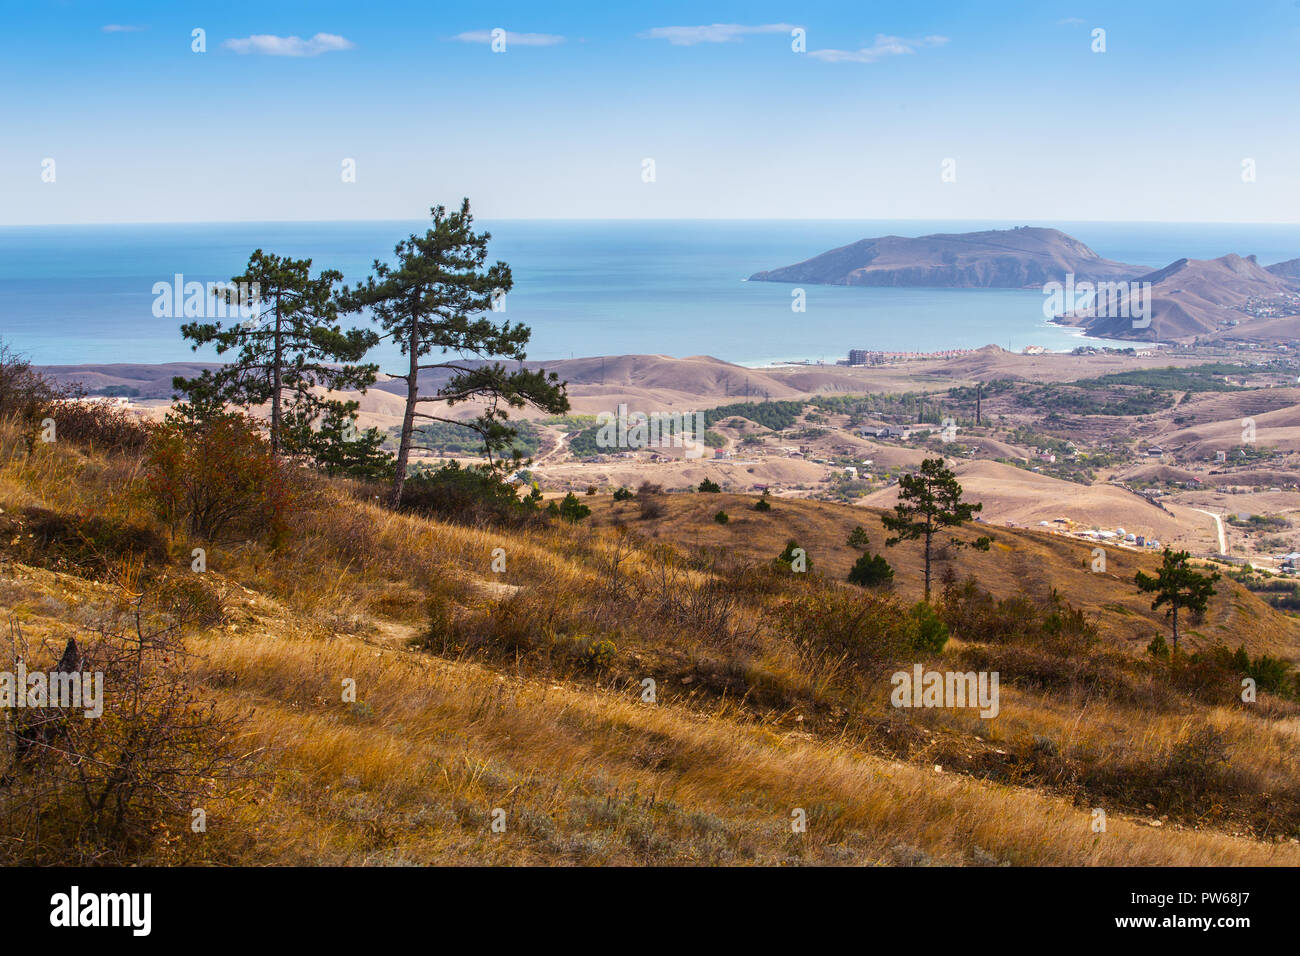 colorful view of the sea, hilly island and cottages in the distance Stock Photo